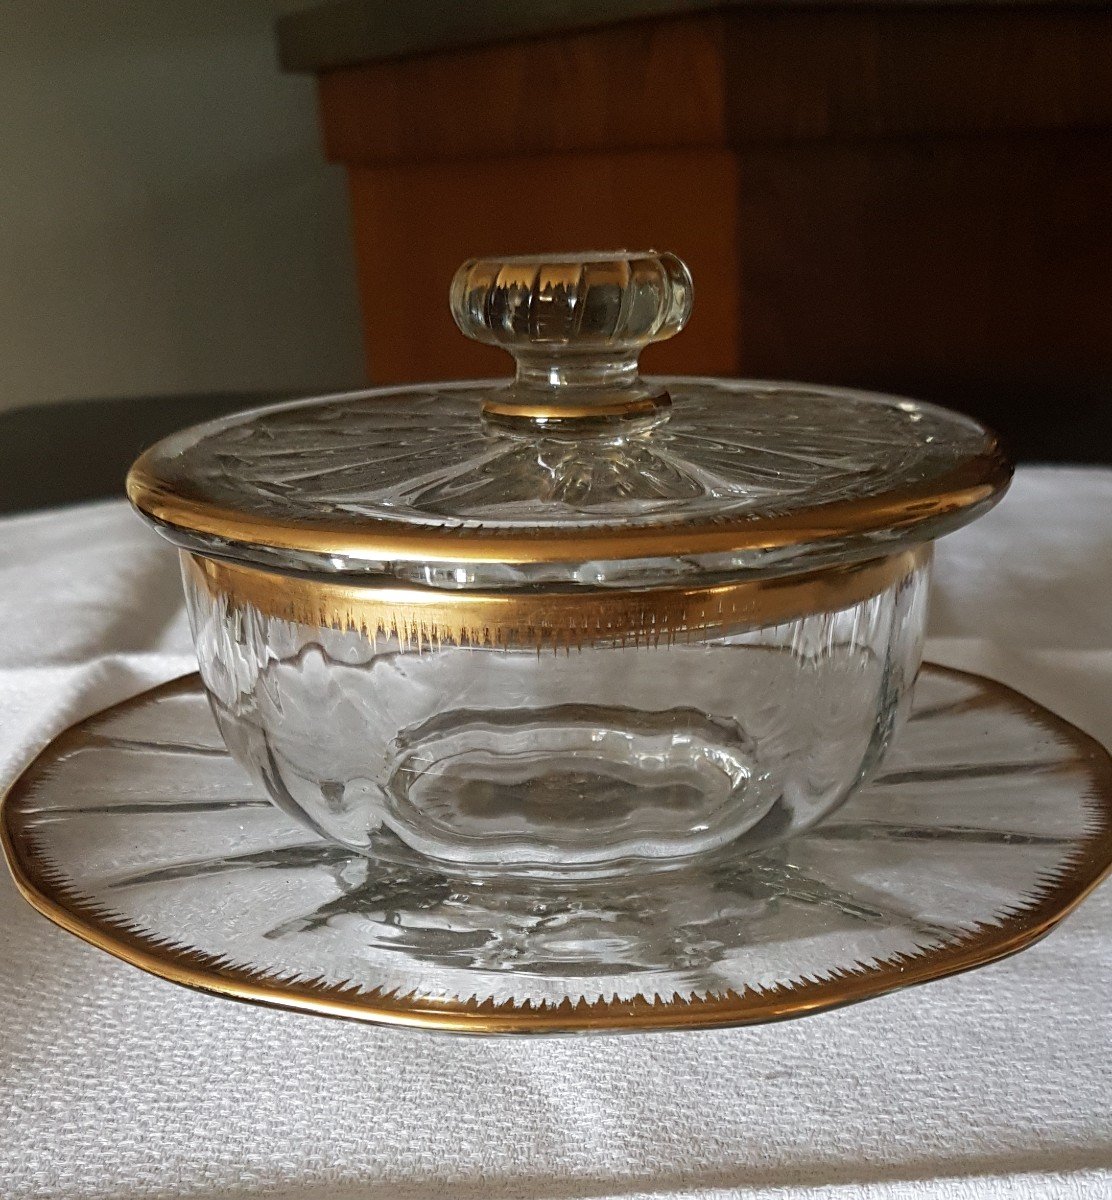 Covered Jampot And Its Daum Crystal Saucer - 19th Time-photo-8